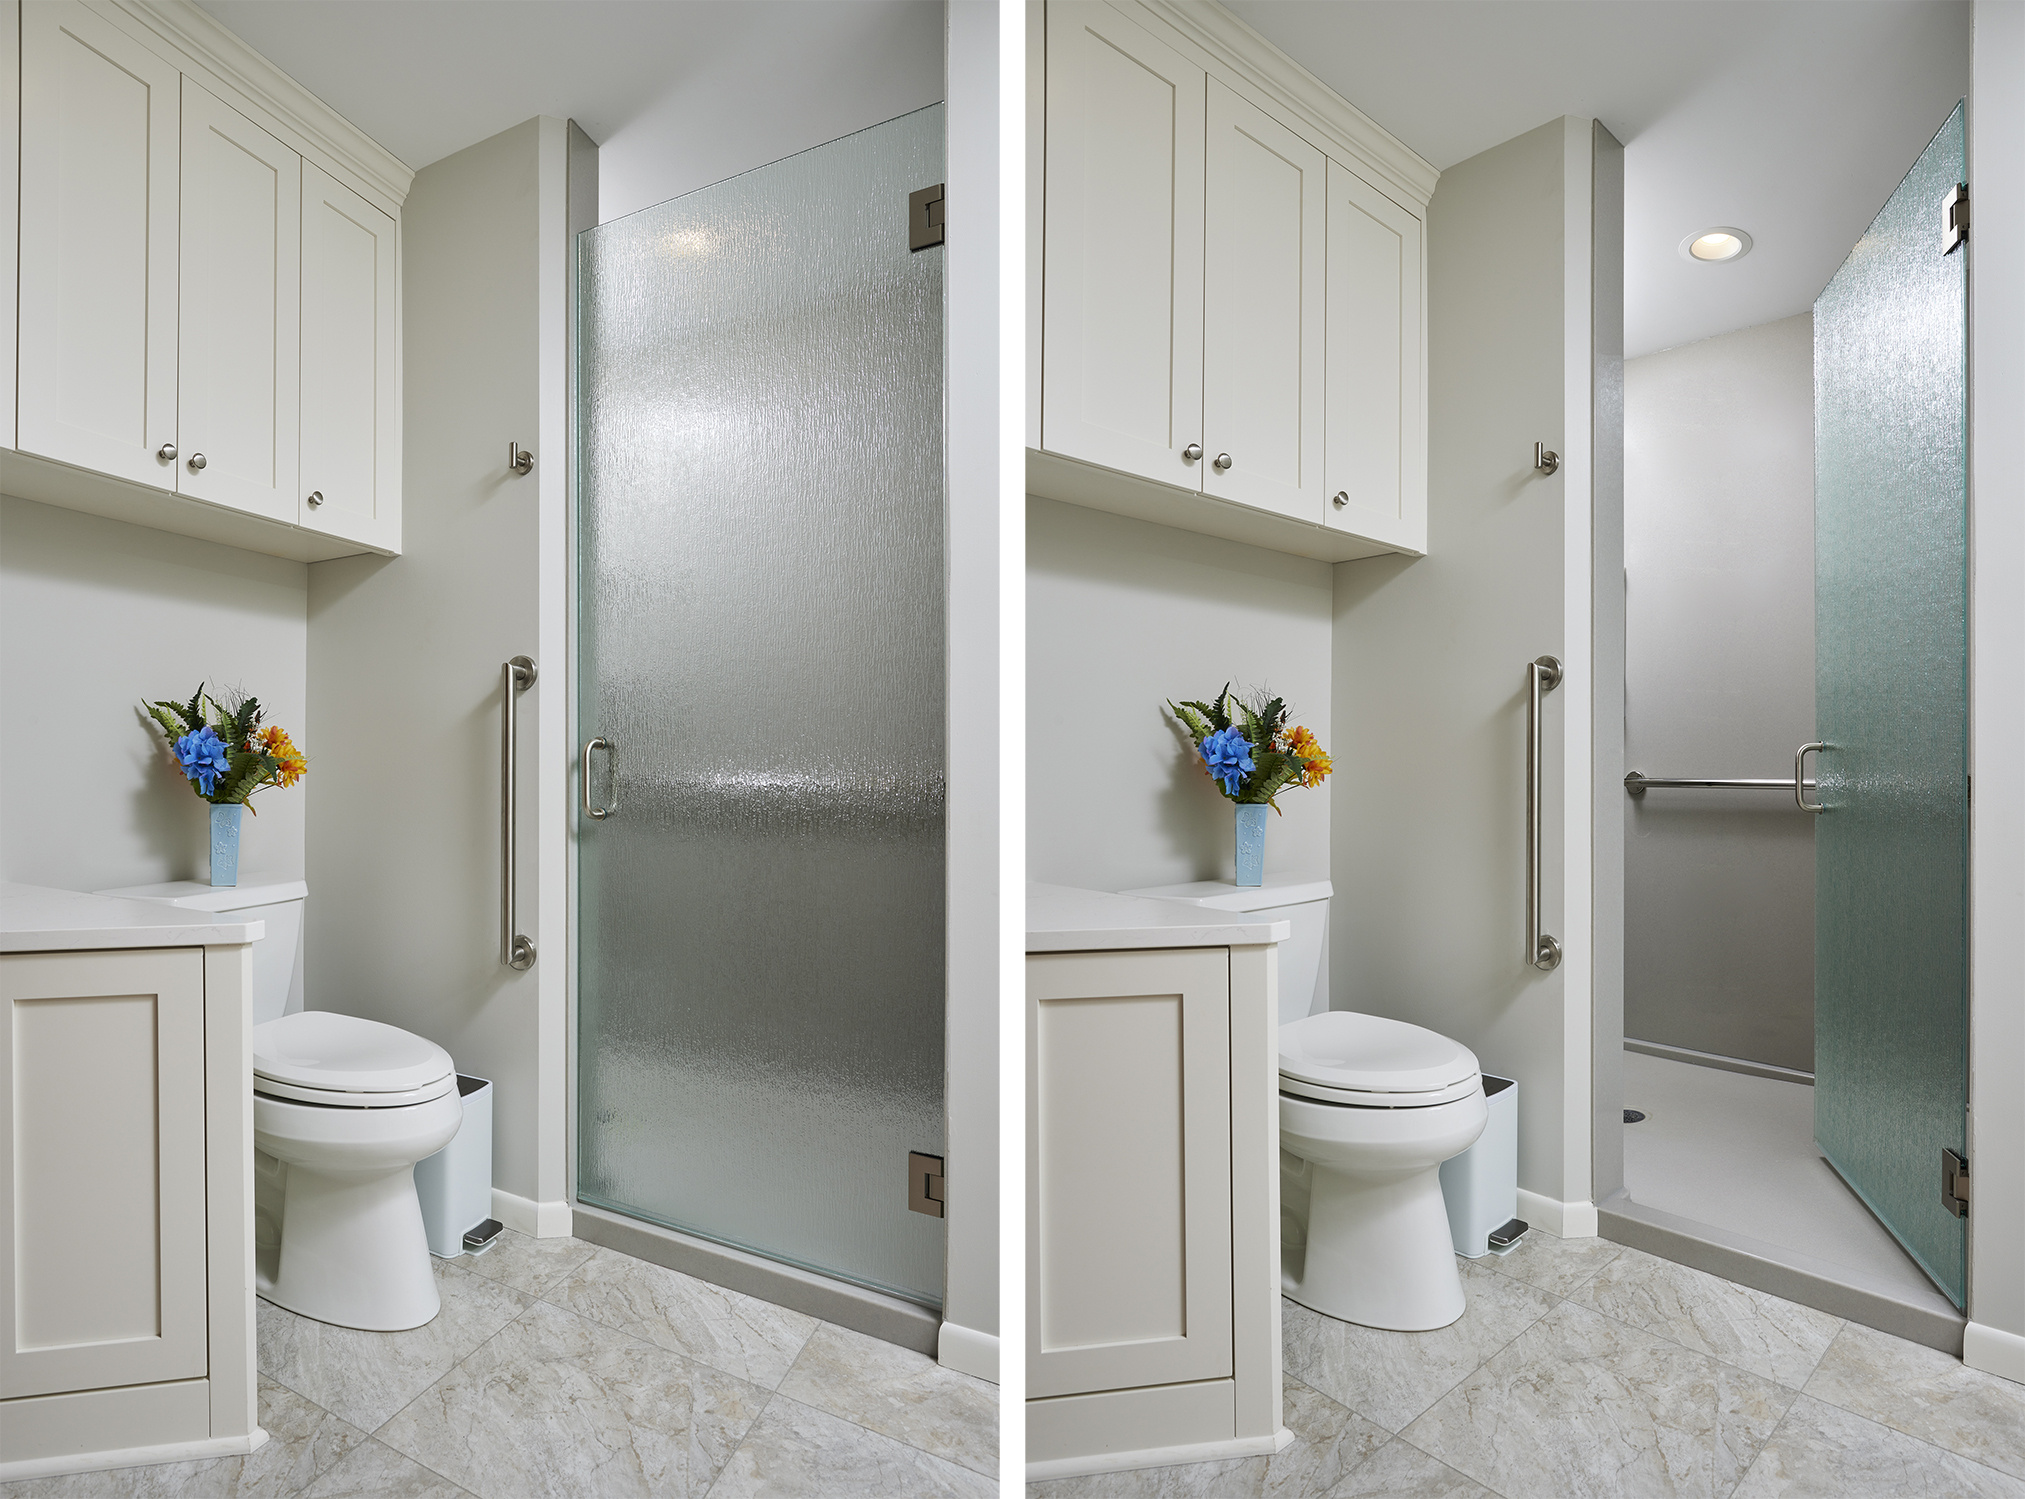 AFTER: Vanity, mirrors, floating shelving and free-standing tub.